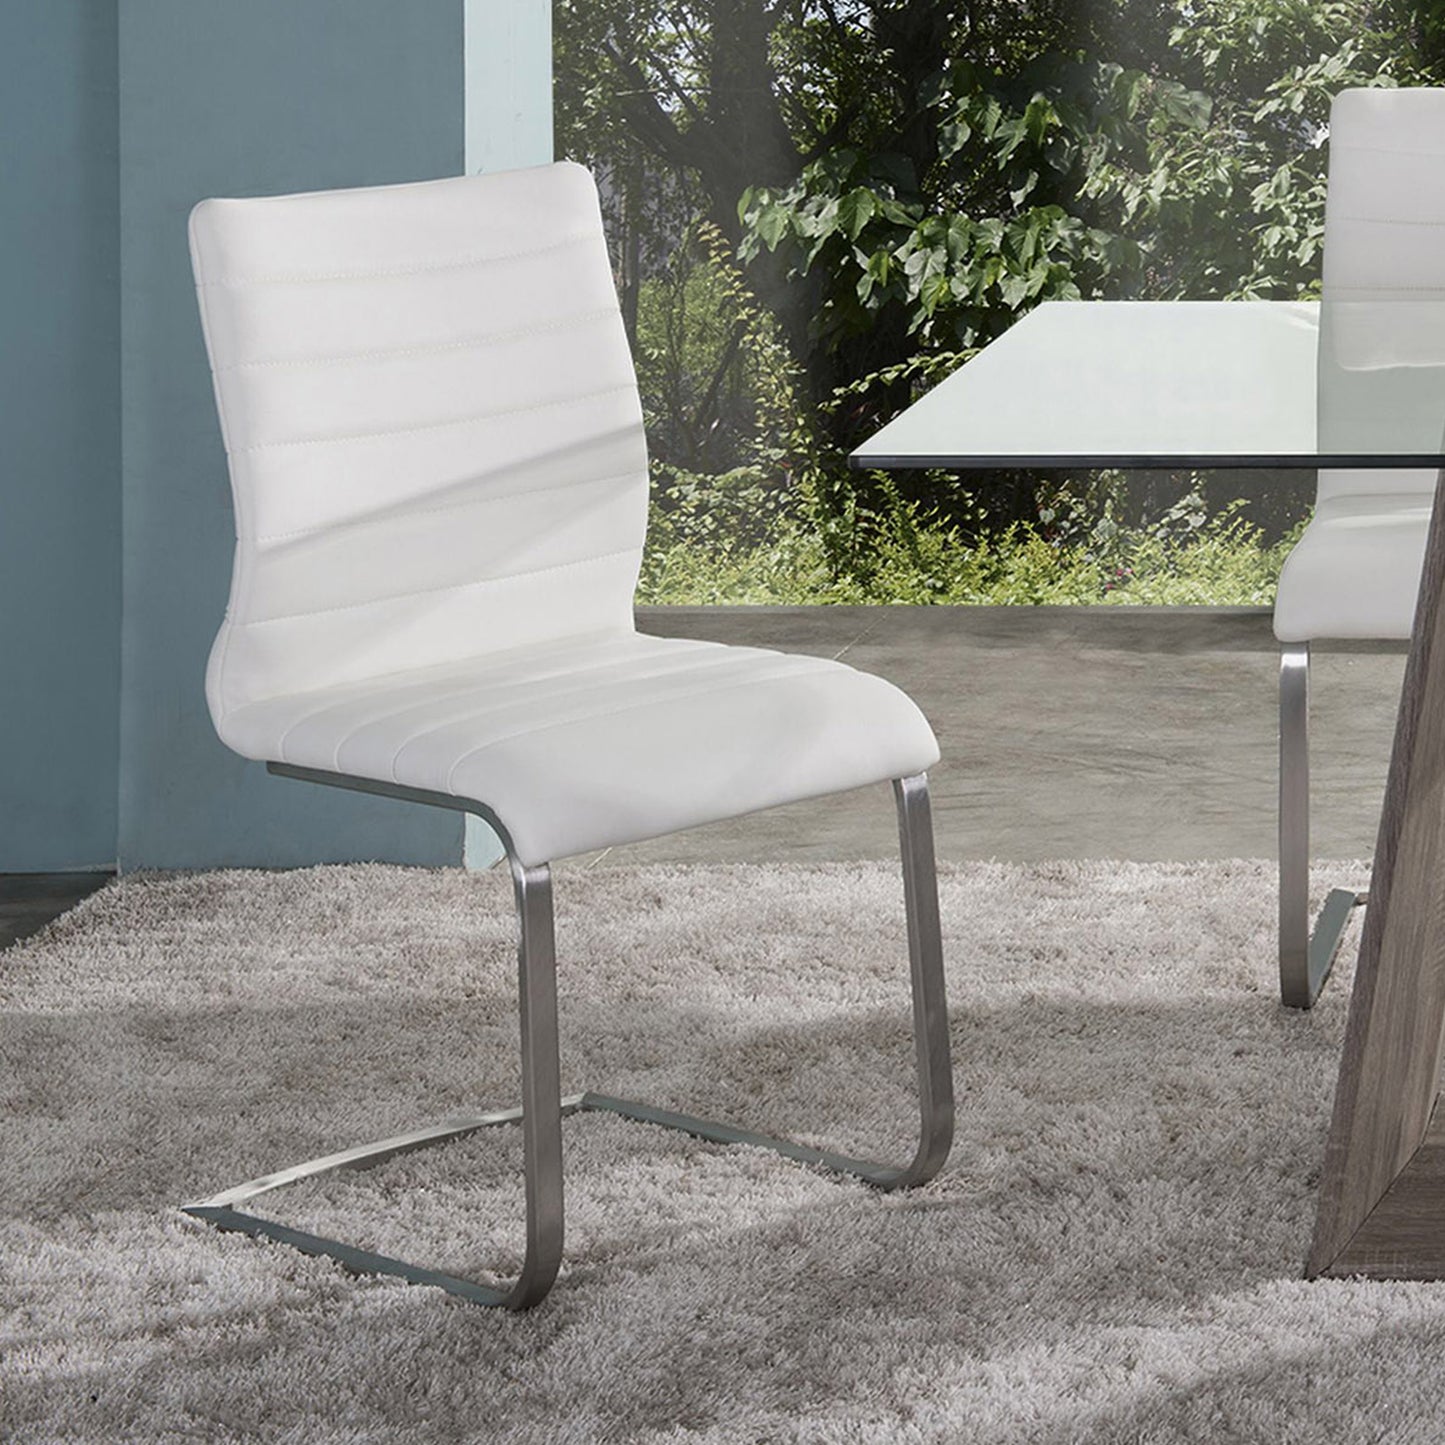 Fusion Contemporary Side Chair In White and Stainless Steel - Set of 2